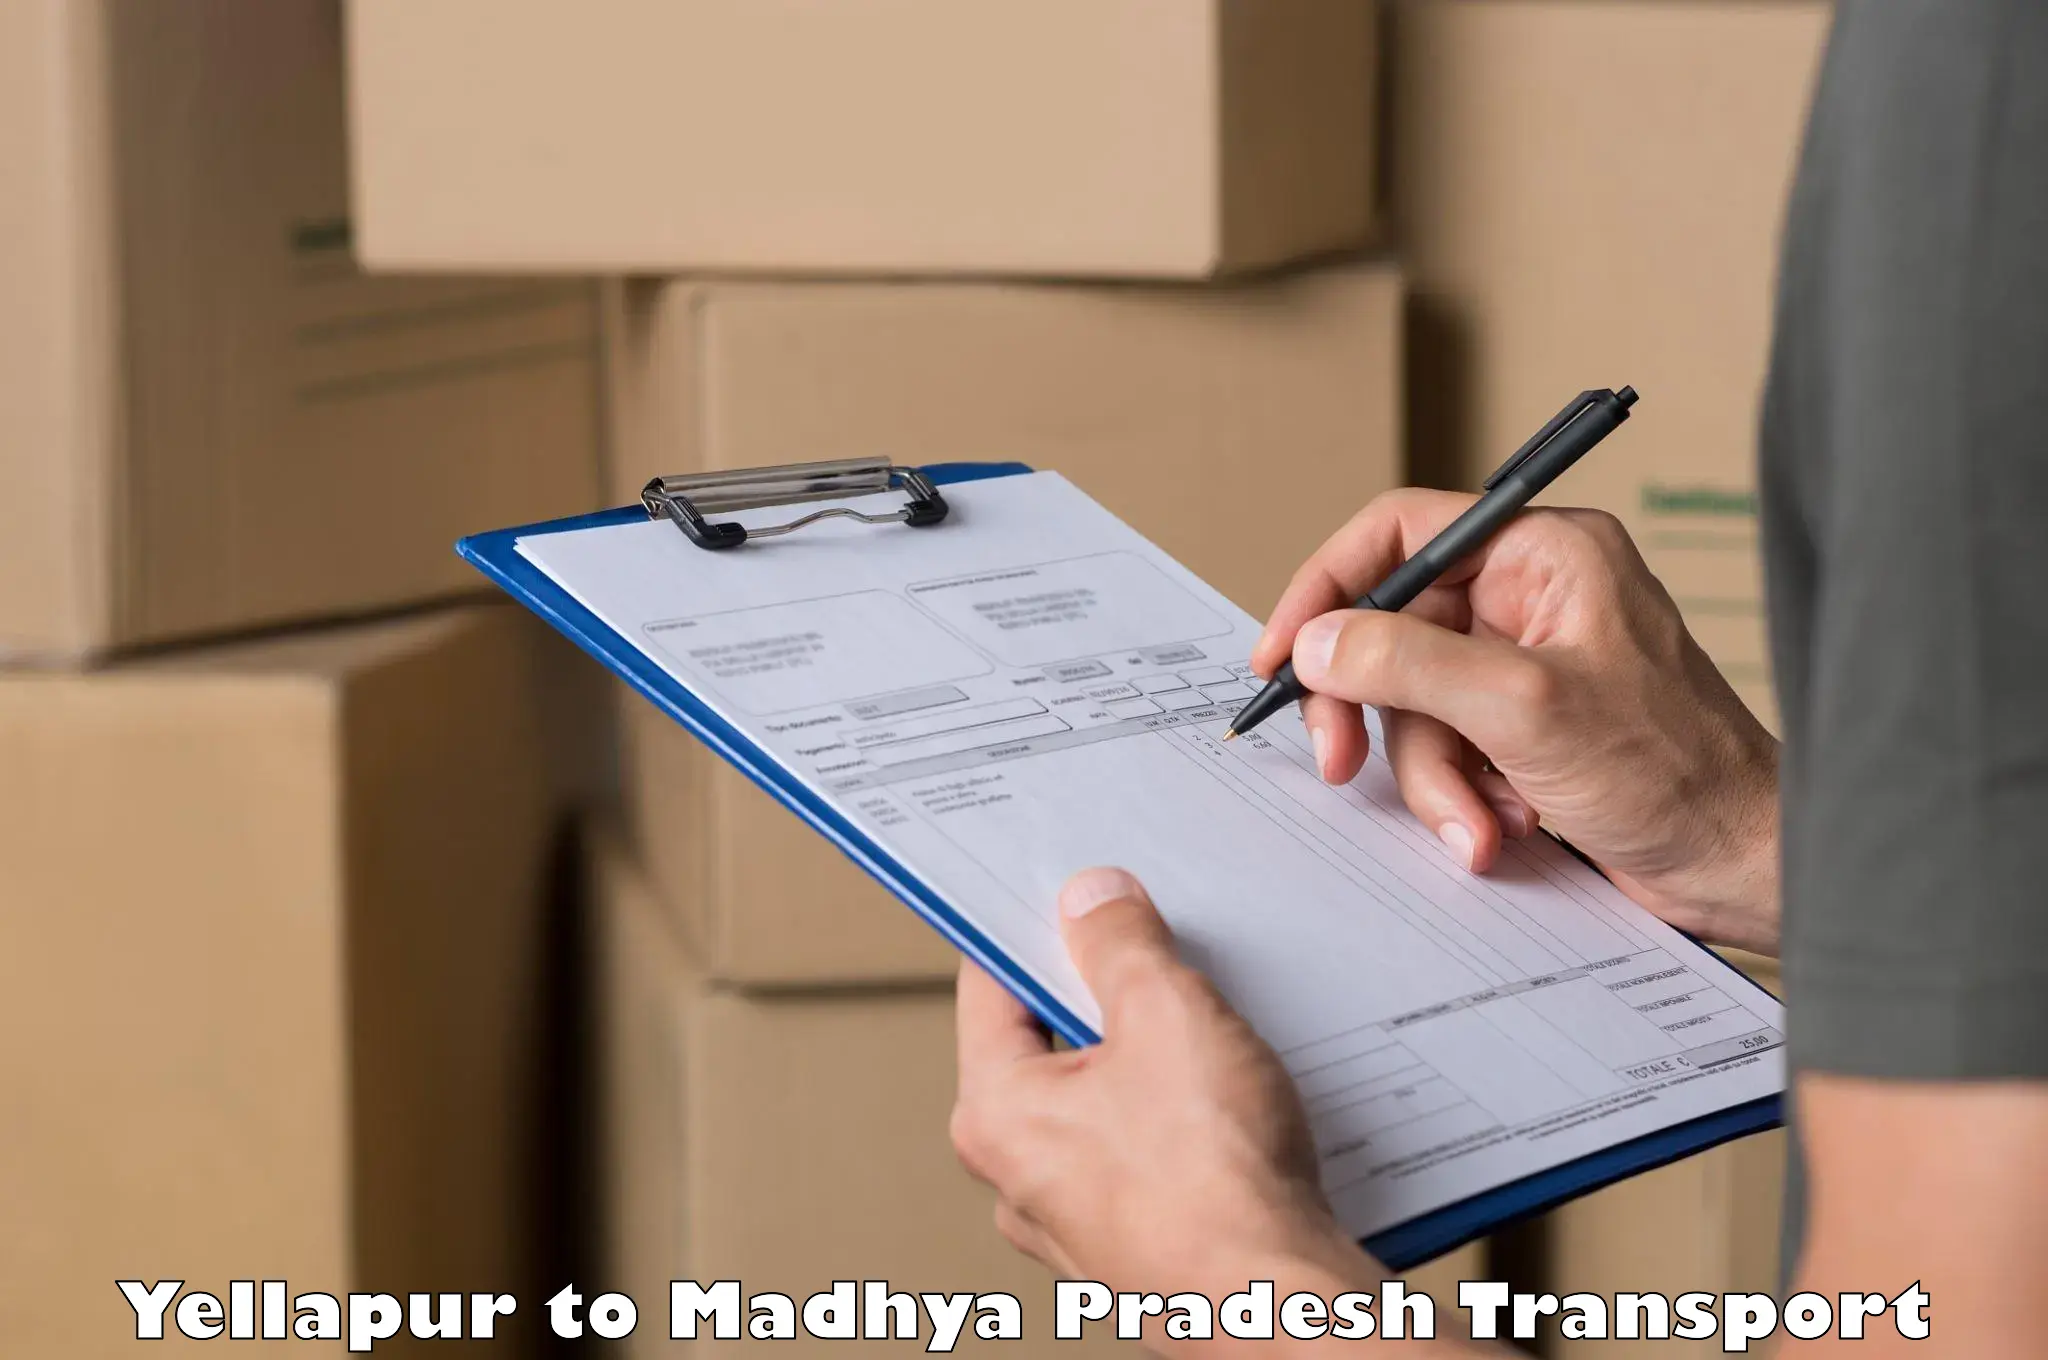 Transport shared services in Yellapur to Pachore